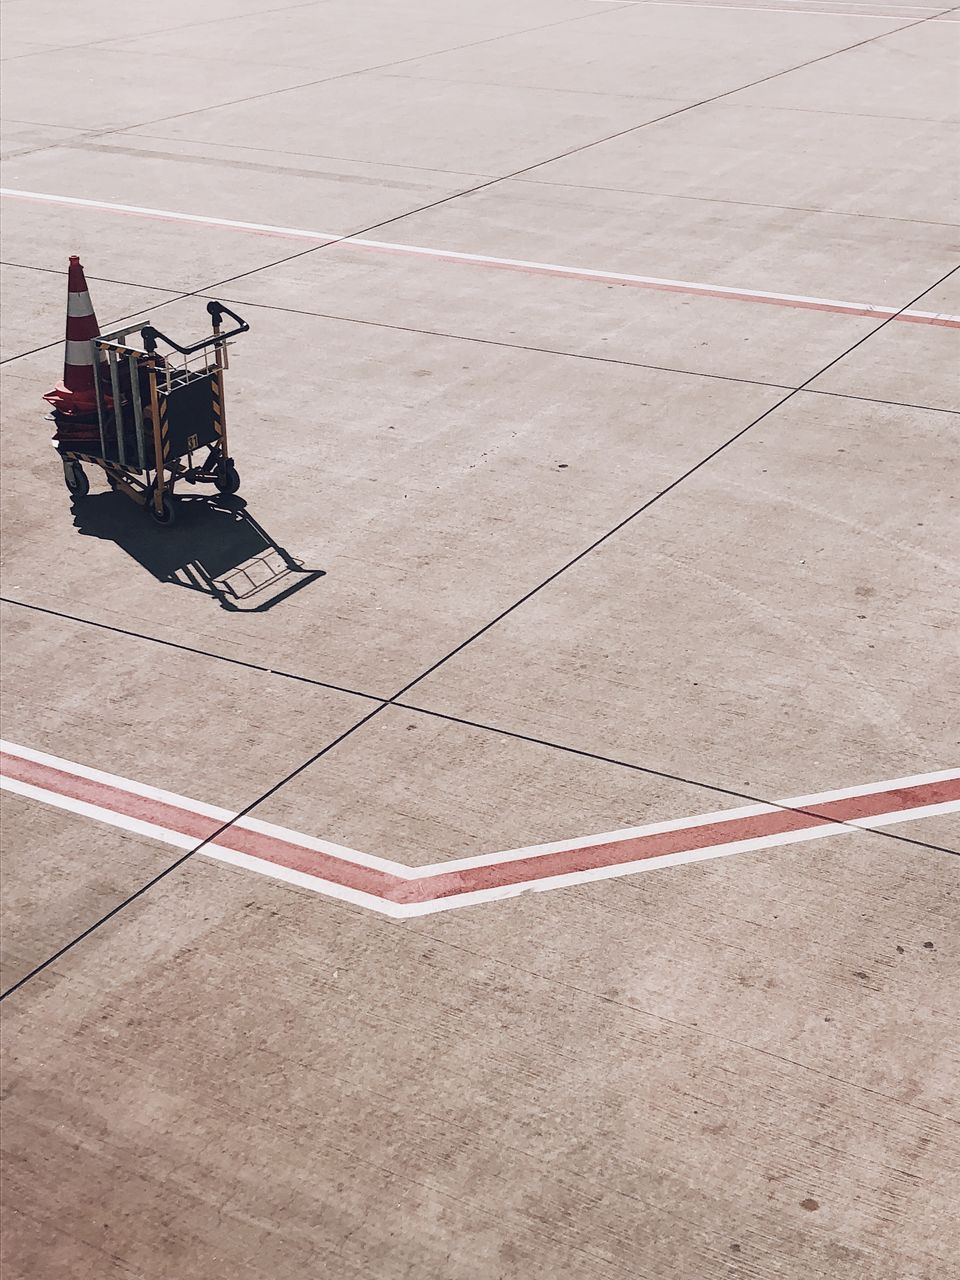 High angle view of luggage cart on airport runway